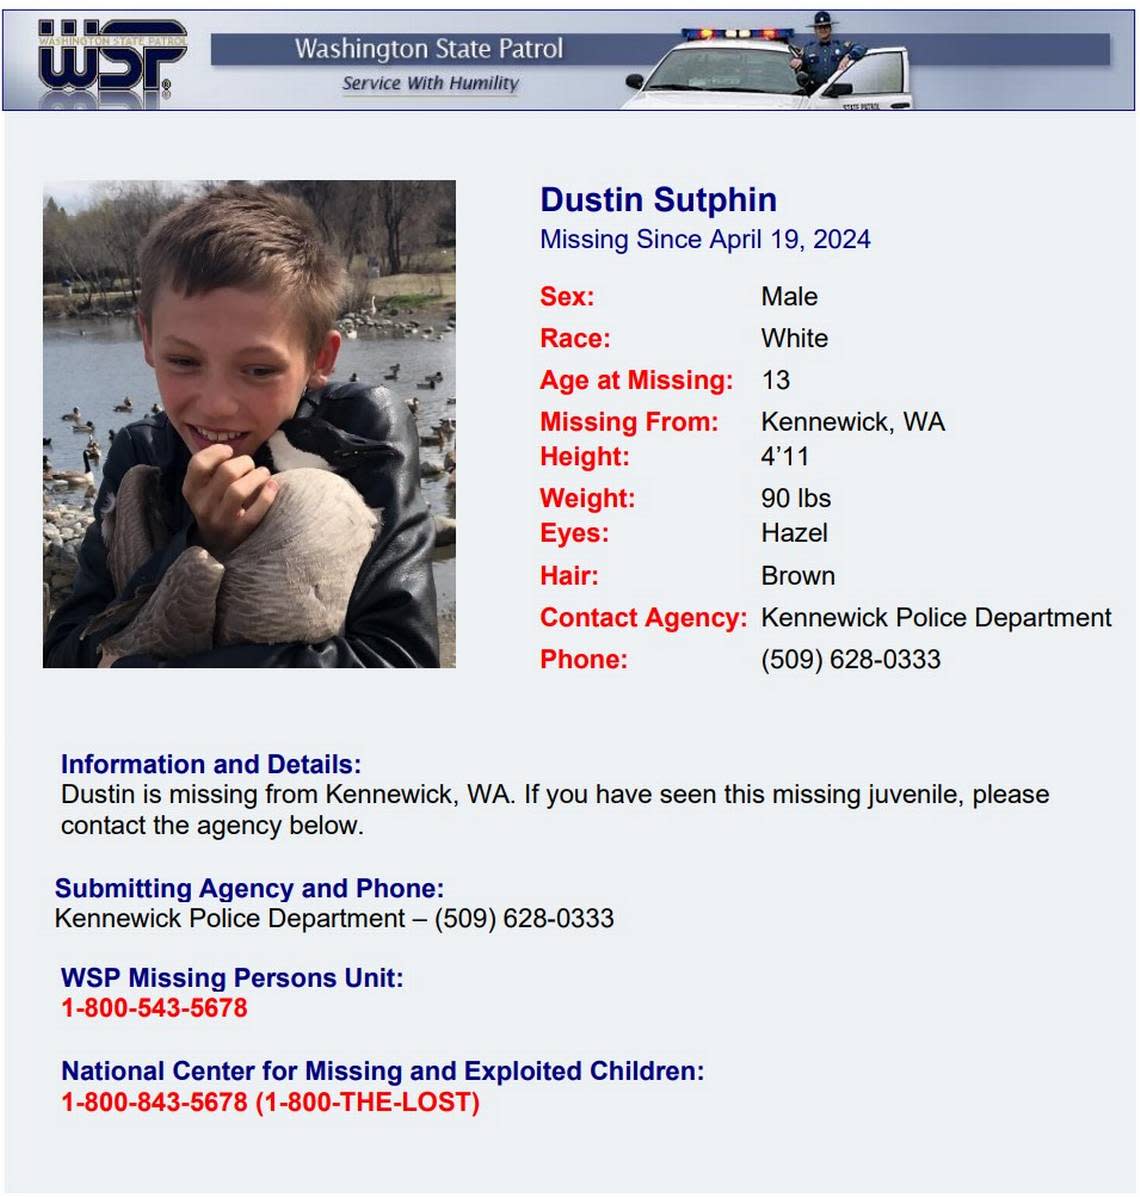 Dustin Sutphin has been missing for about half a month, according to the Washington State Patrol flier.